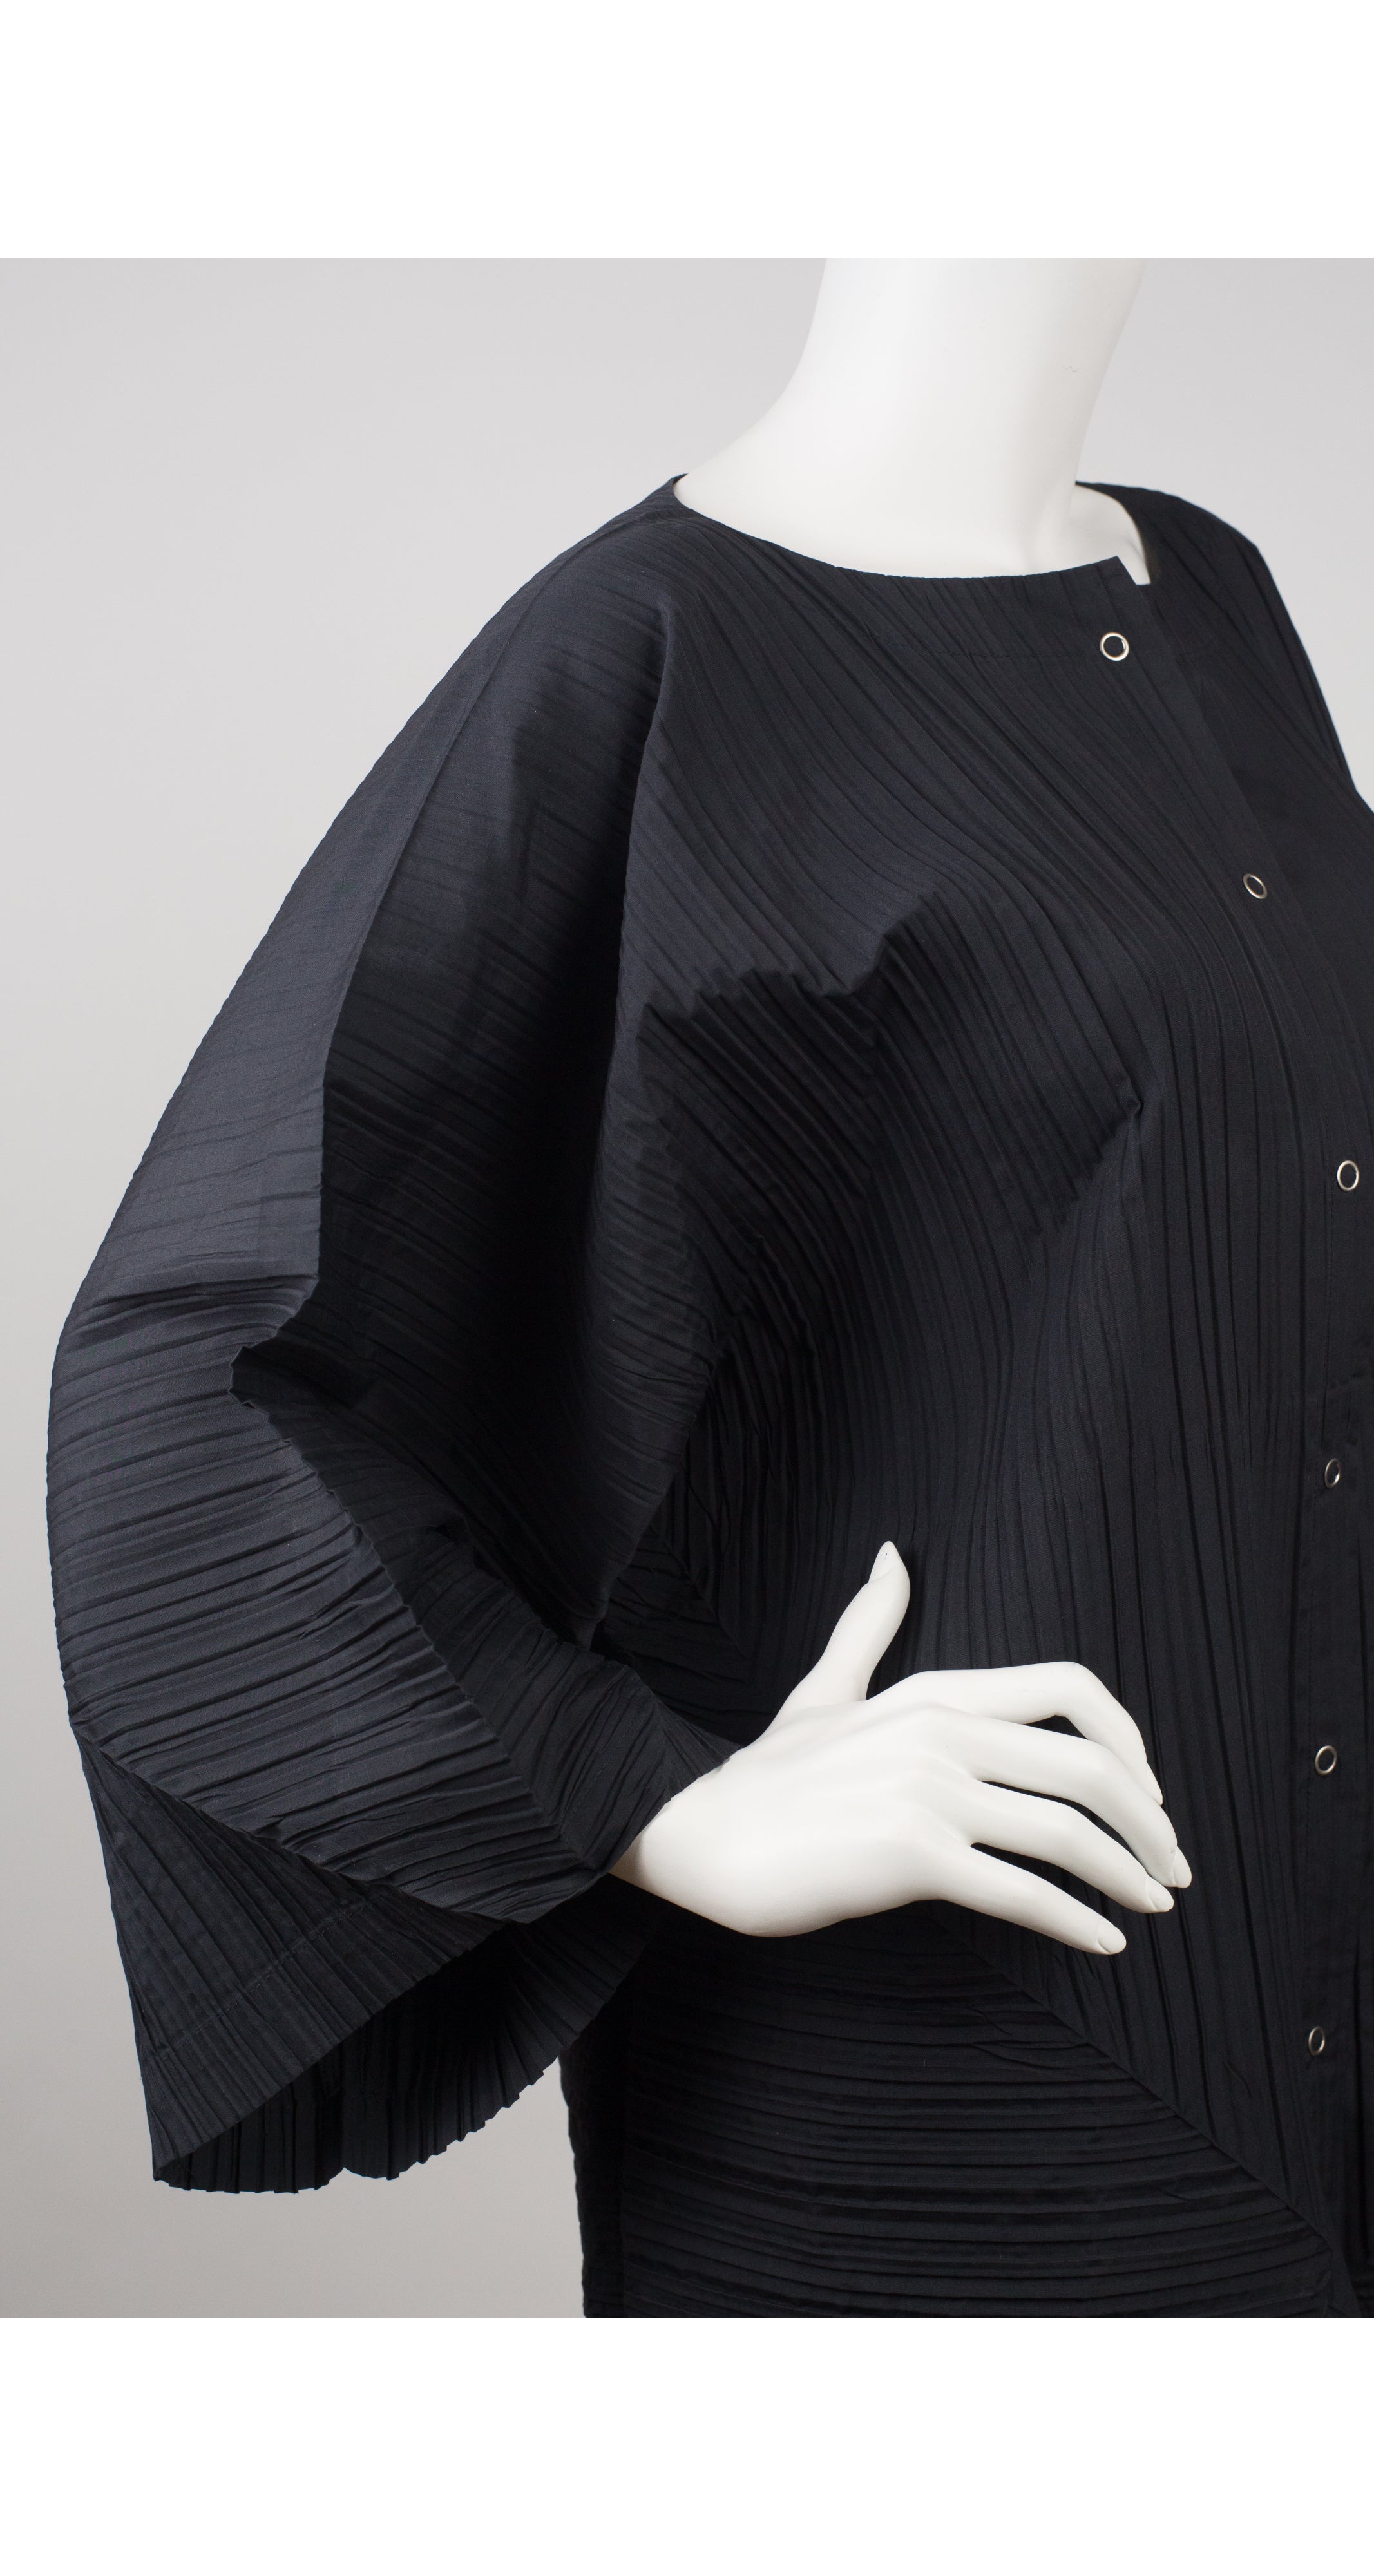 1989 S/S Black Origami Pleated Blouse